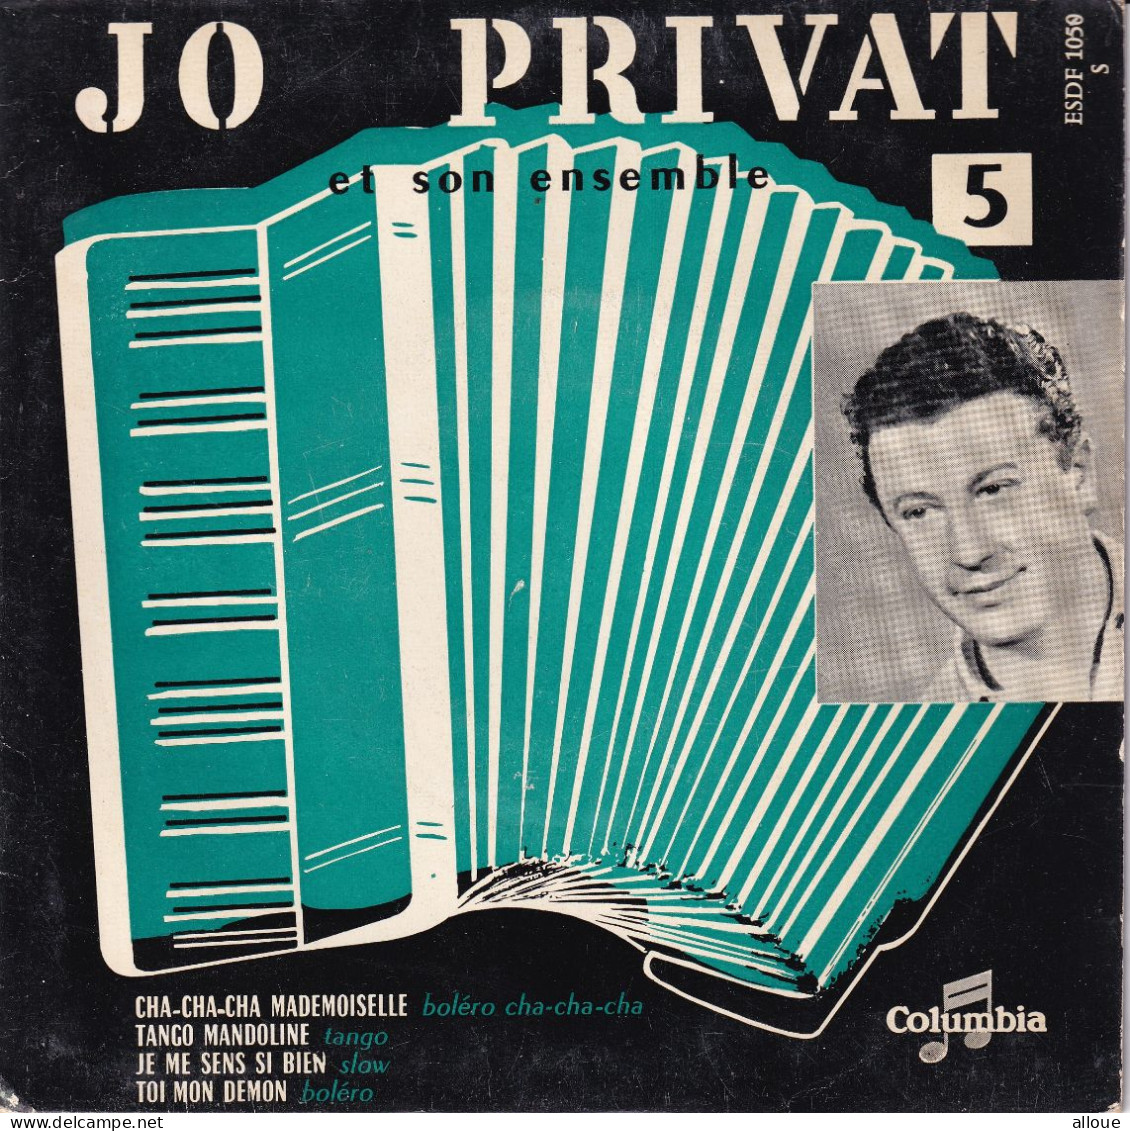 JO PRIVAT  - FR EP -  CHA-CHA-CHA MADEMOISELLE   + 3 - Other - French Music